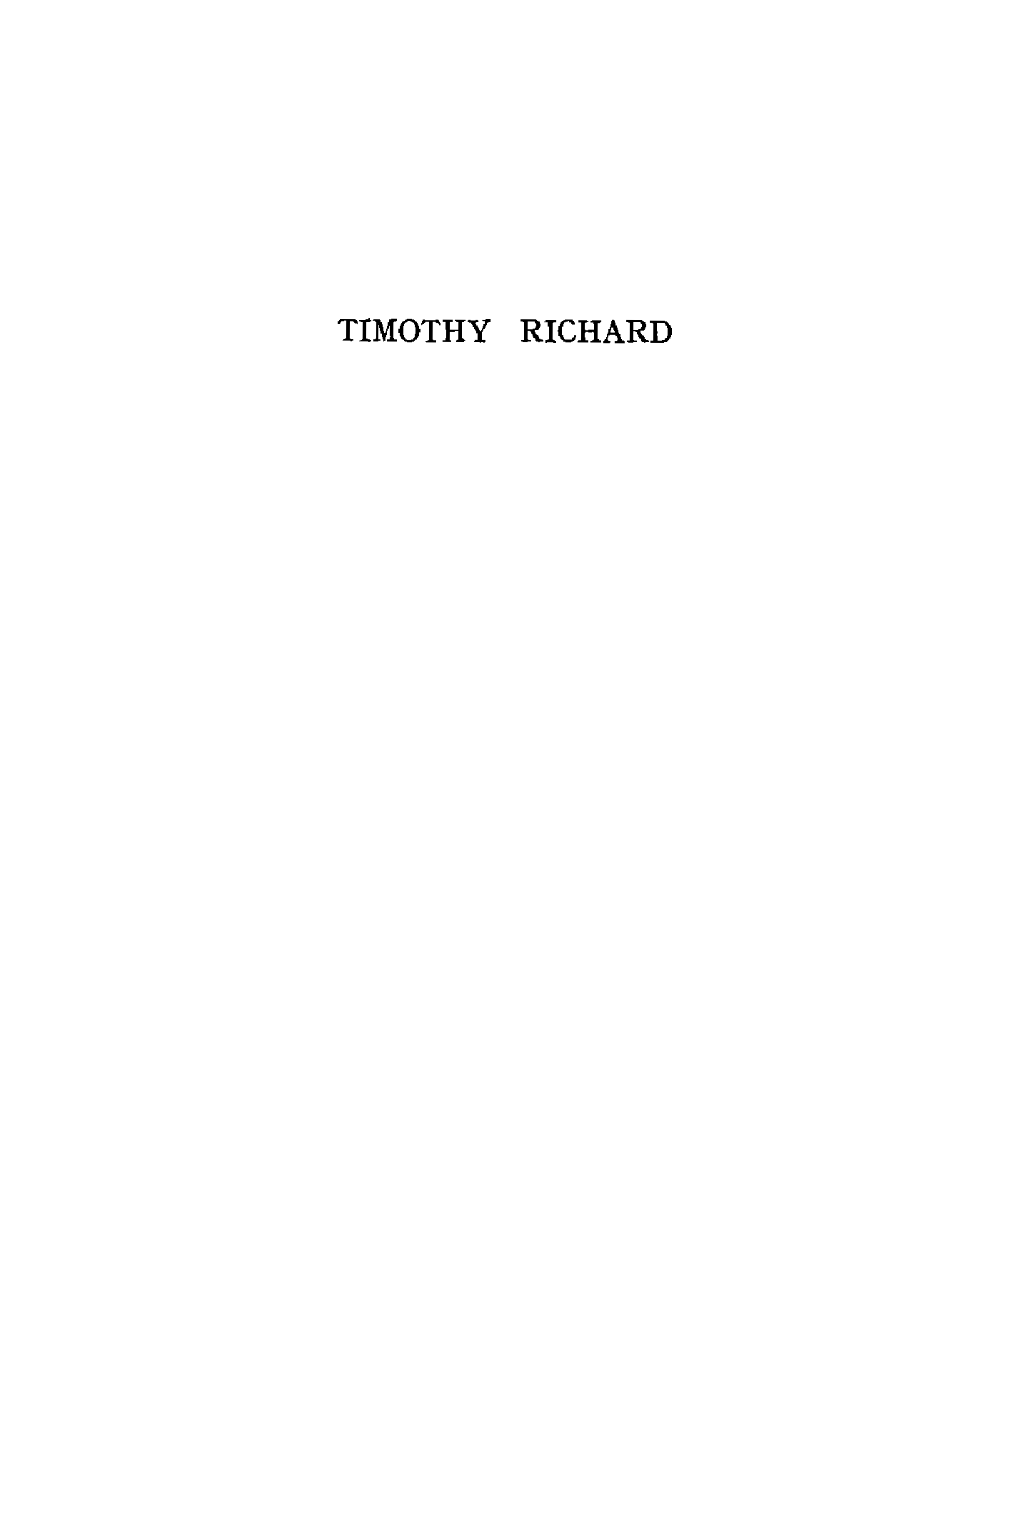 TIMOTHY RICHARD Tti\IOTHY RICHARD TIMOTHY RICHARD a Narrative of Christian Enterprise and Statesmanship in China